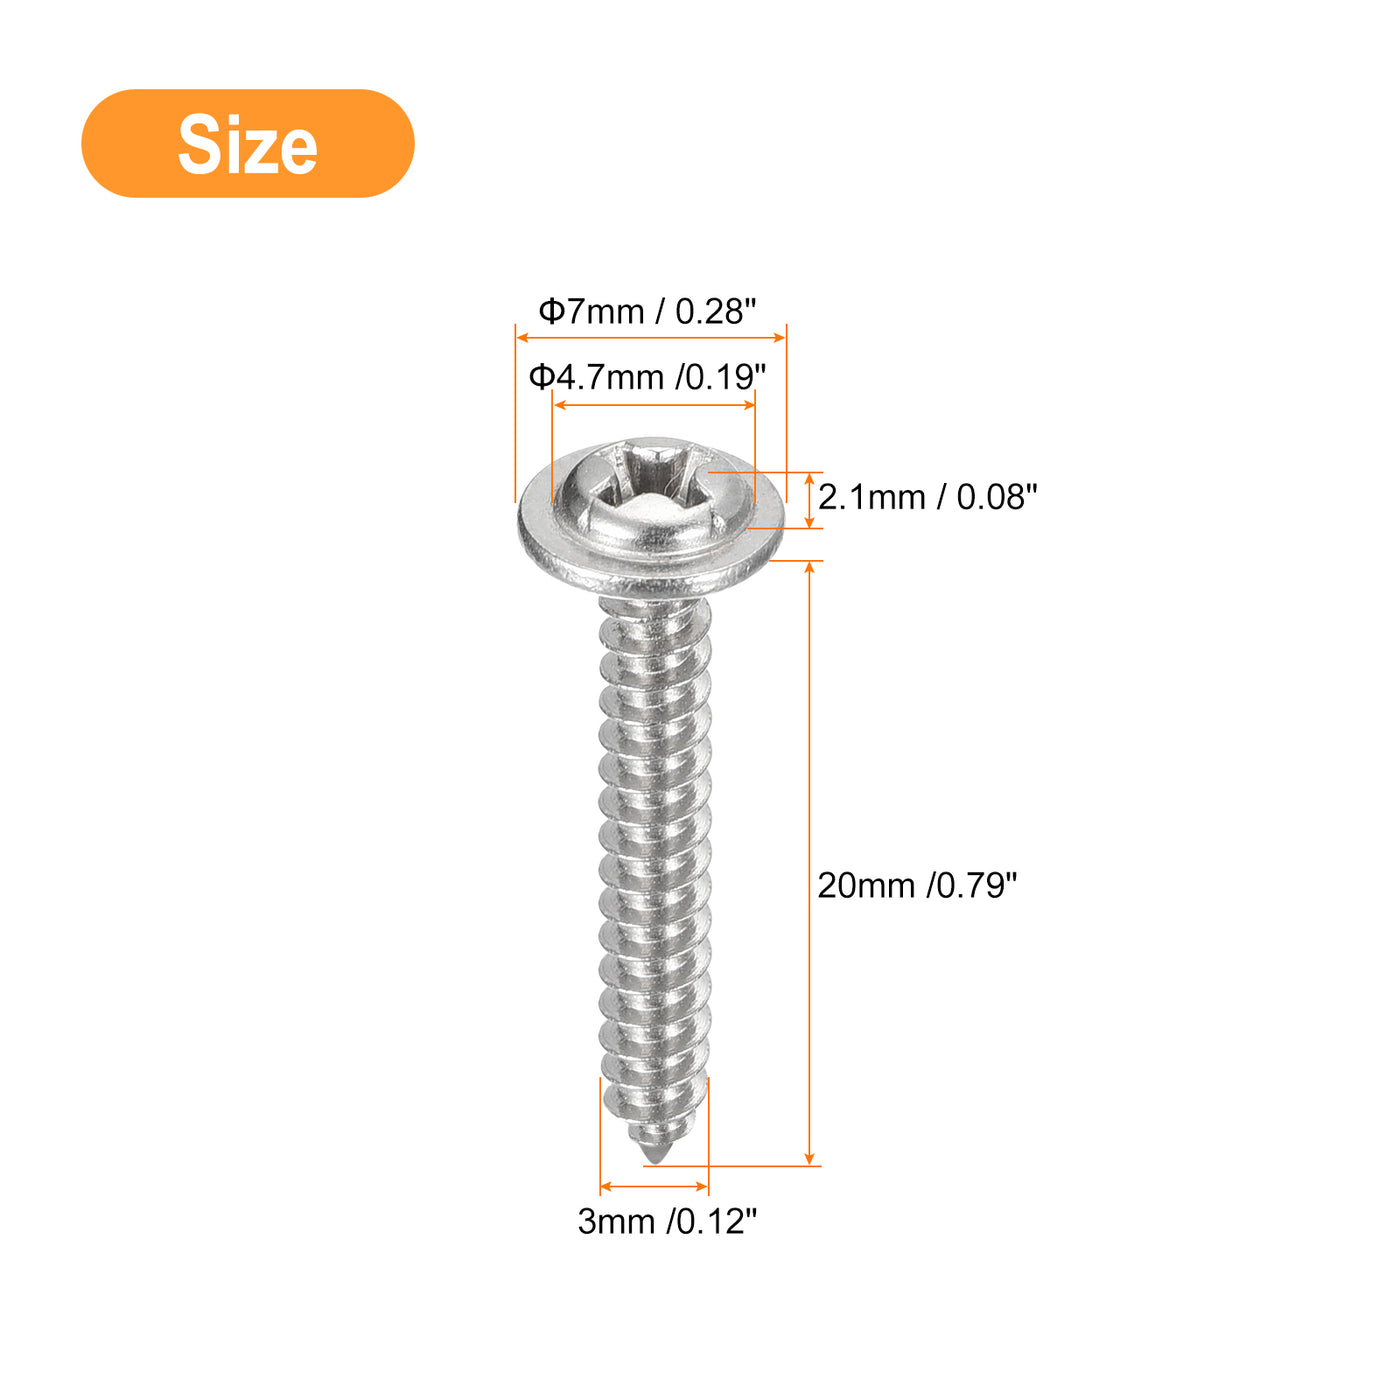 uxcell Uxcell ST3x20mm Phillips Pan Head Self-tapping Screw with Washer, 100pcs - 304 Stainless Steel Wood Screw Full Thread (Silver)